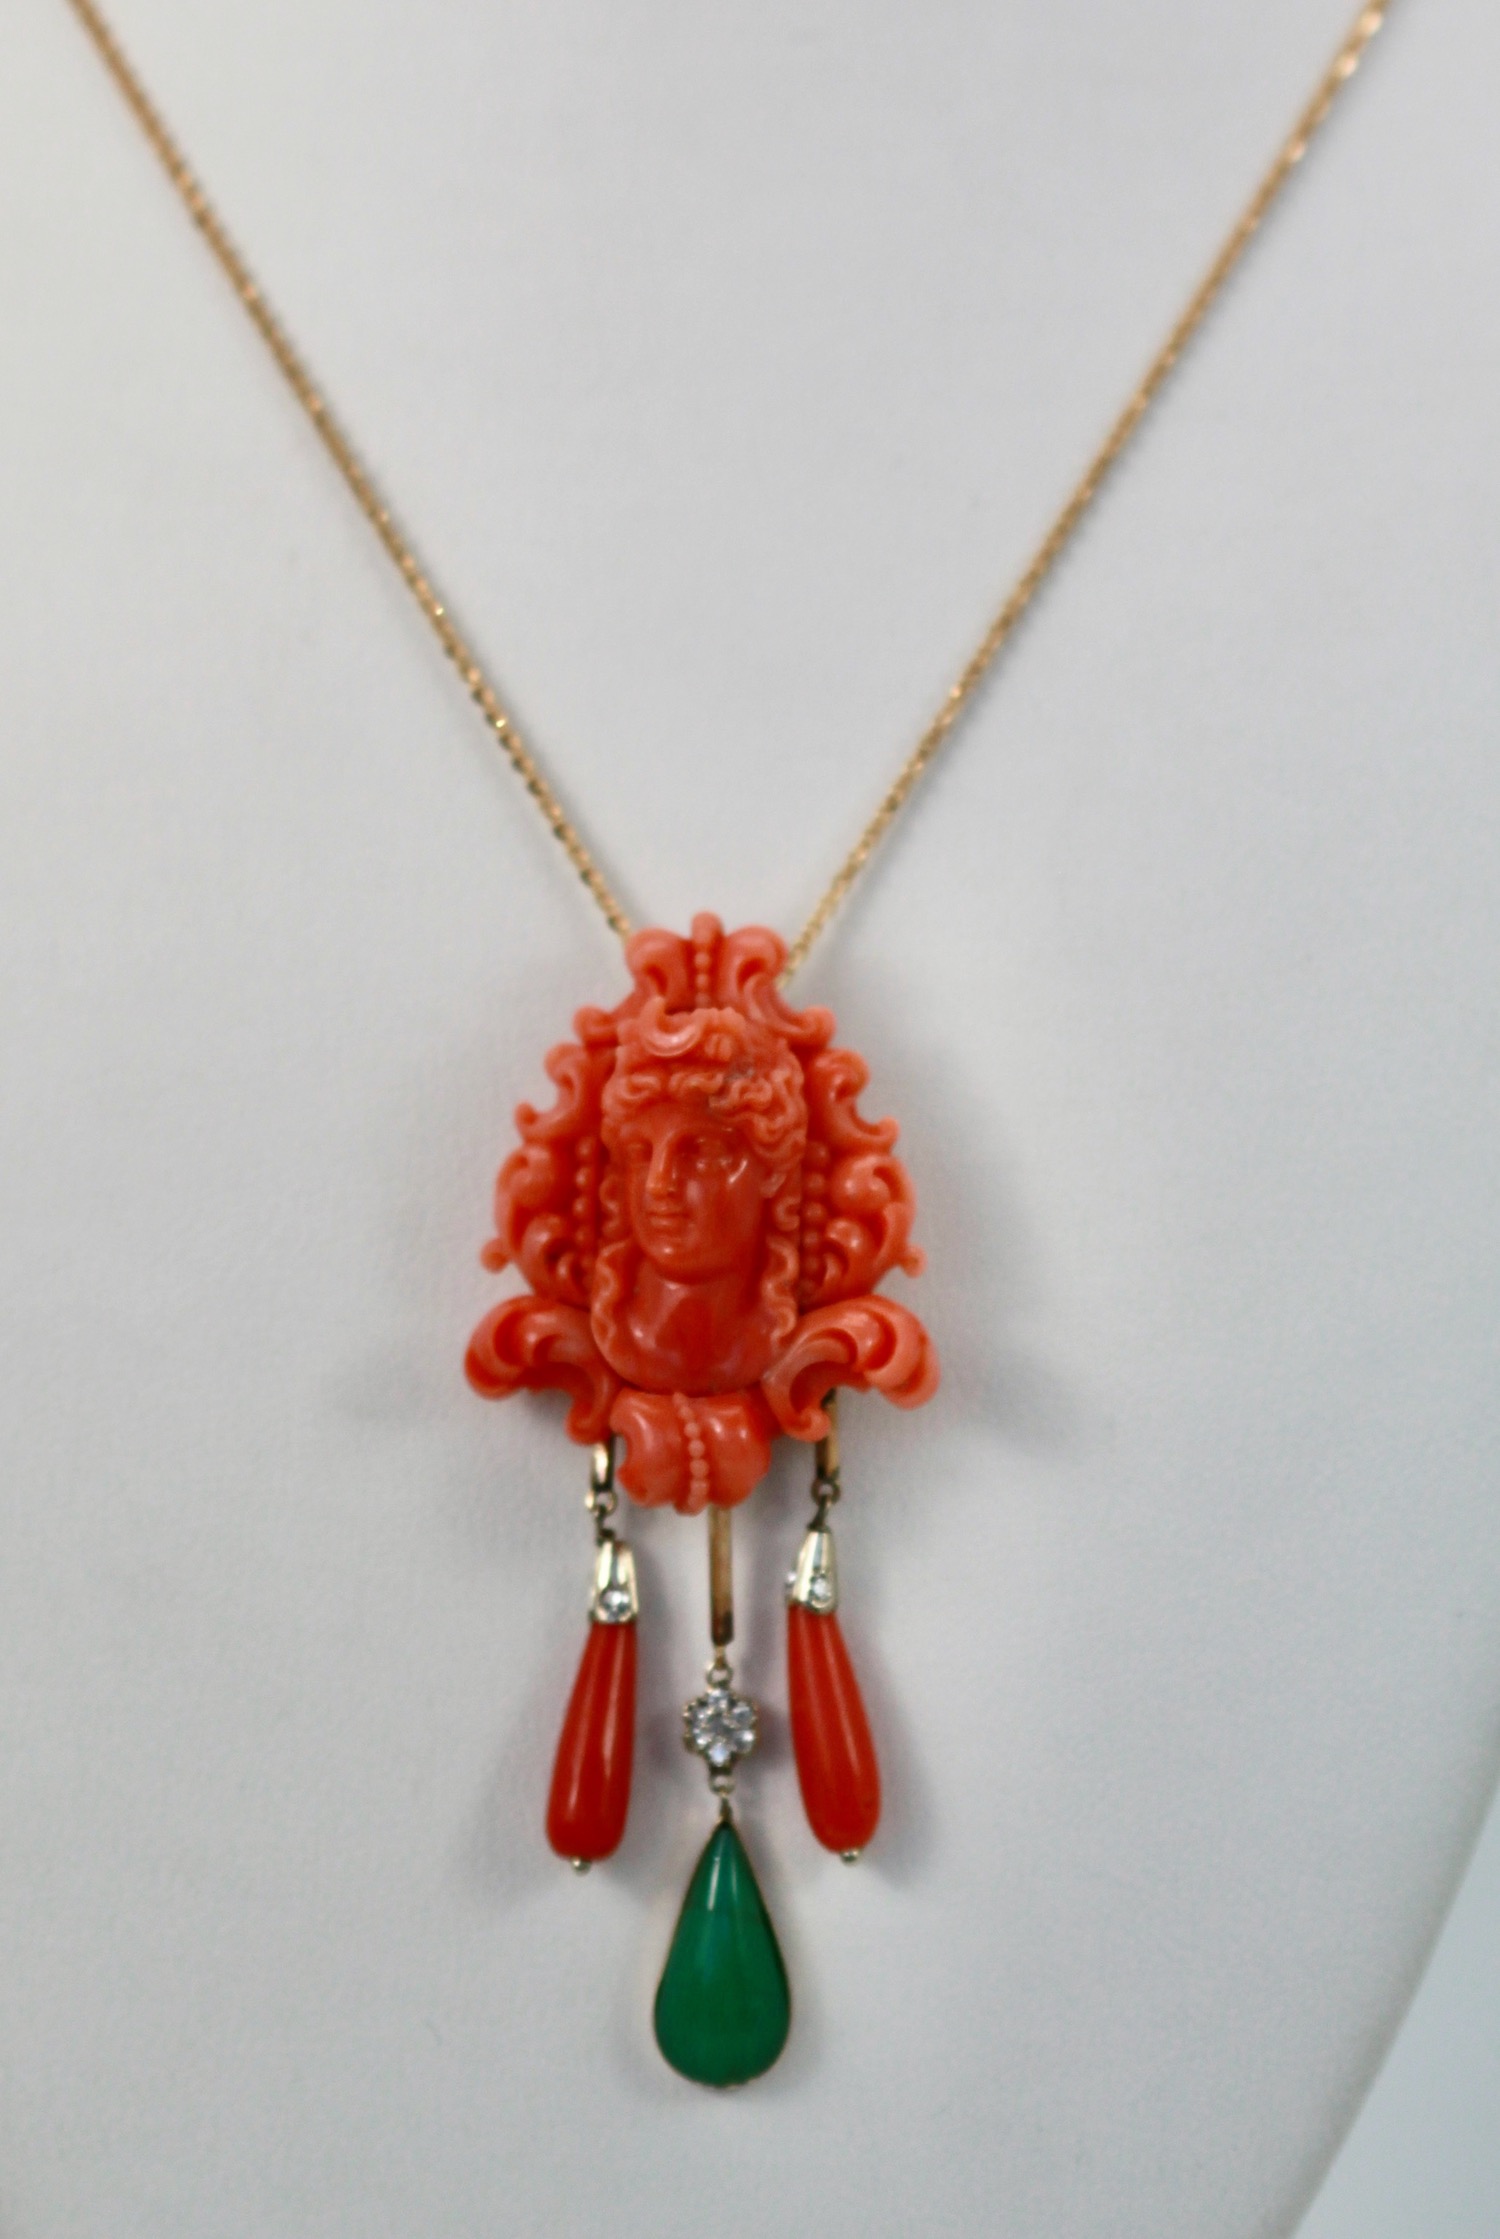 Carved Coral Brooch Pendant w/ Coral drops and Crystophase drop